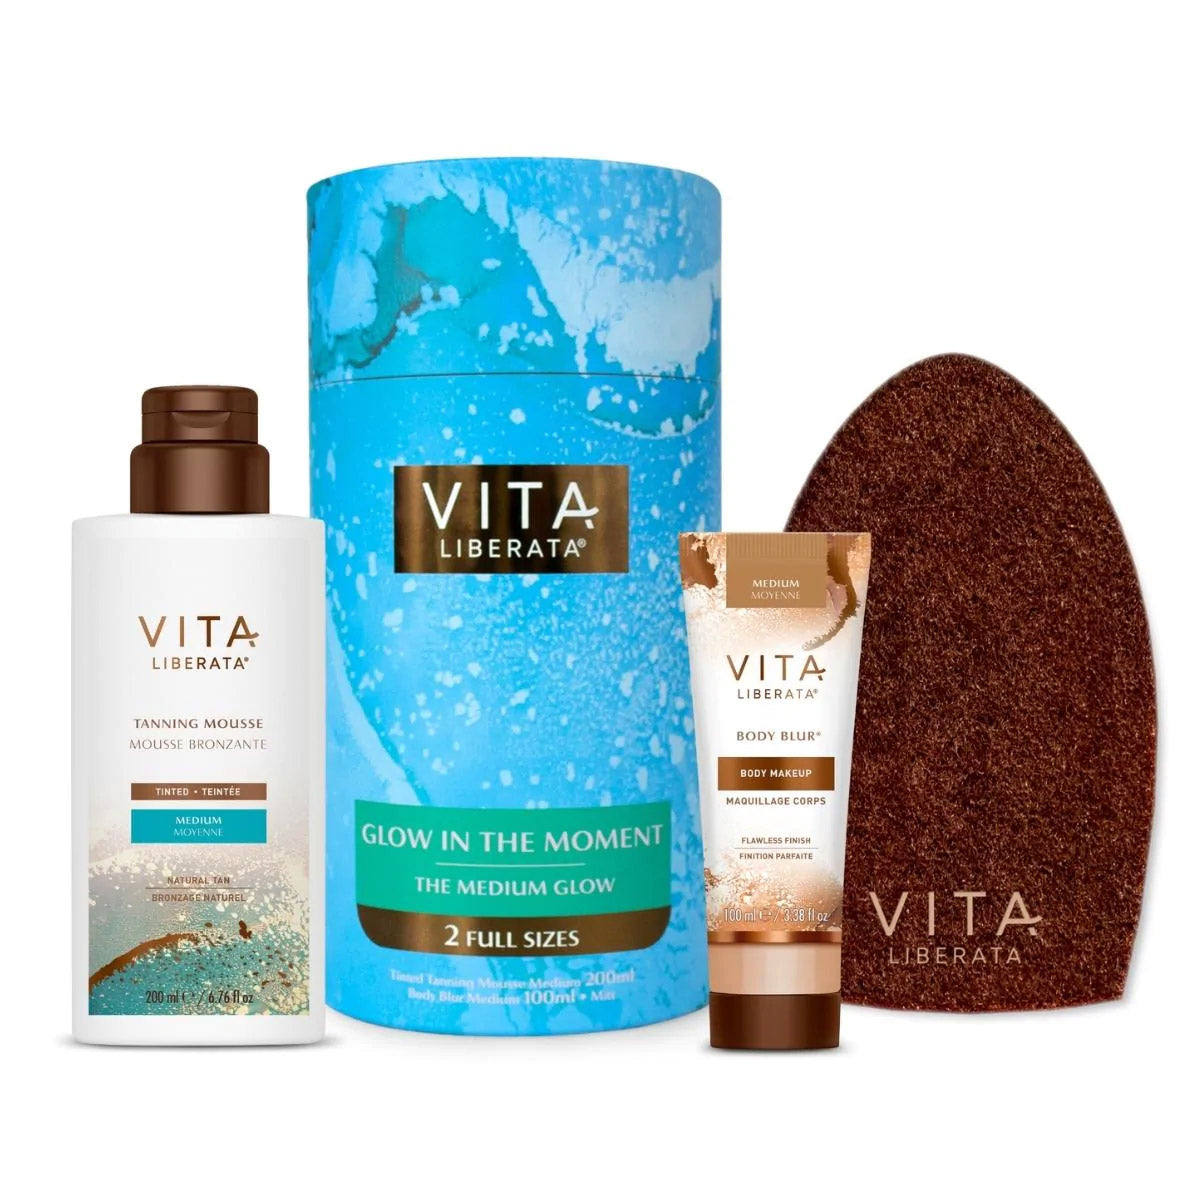 Vita Liberata Glow in The Moment - The Medium Glow Gift Set - Touch of an Angel Wellness and Beauty